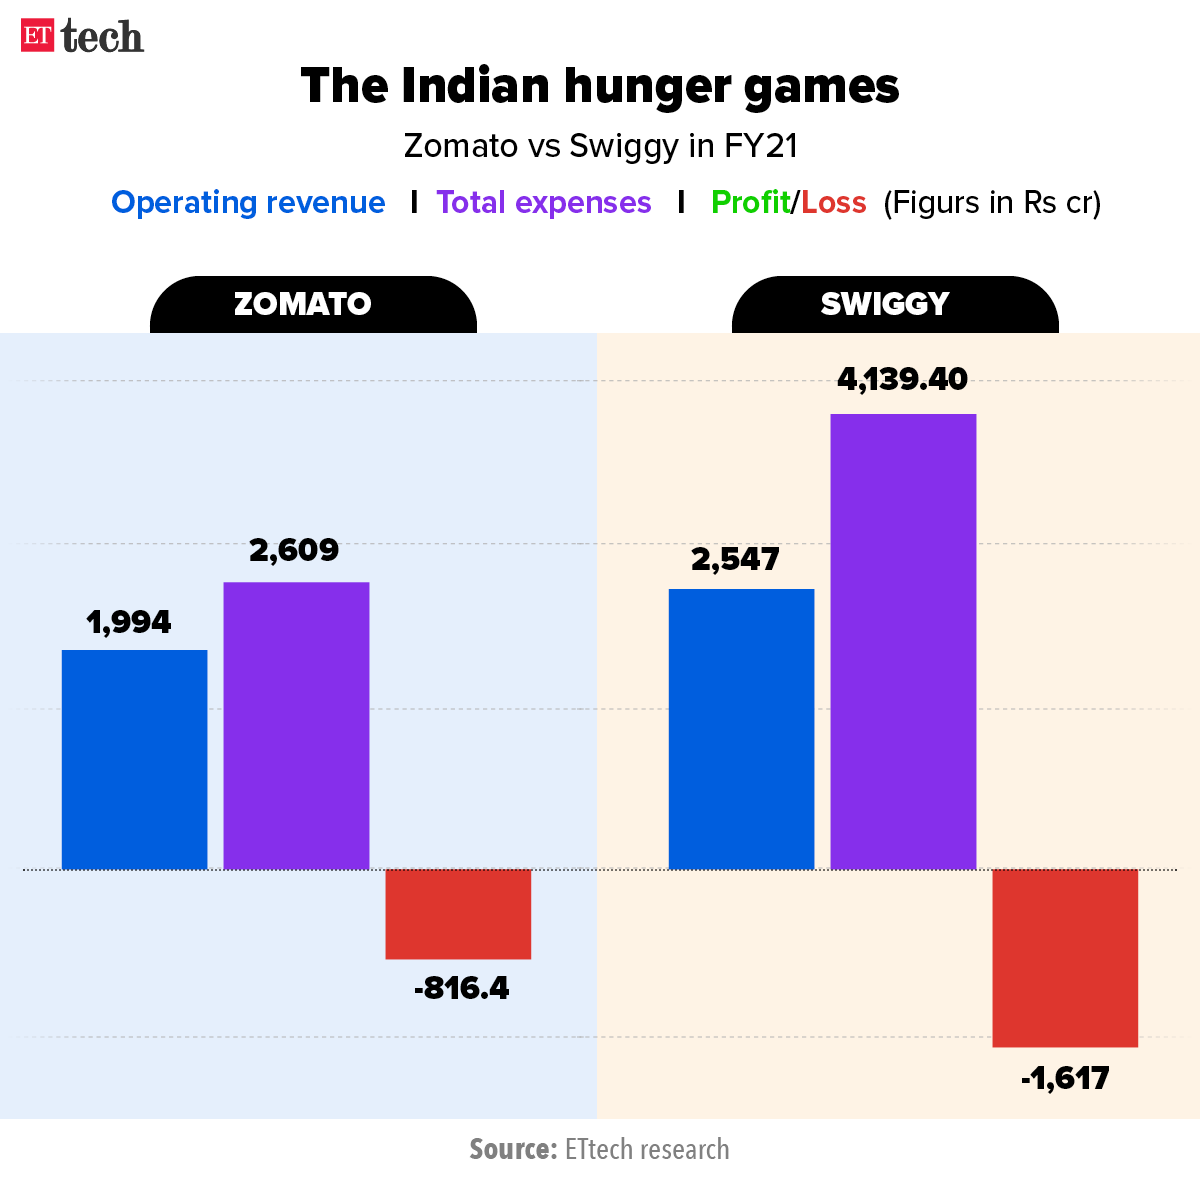 The Indian hunger games